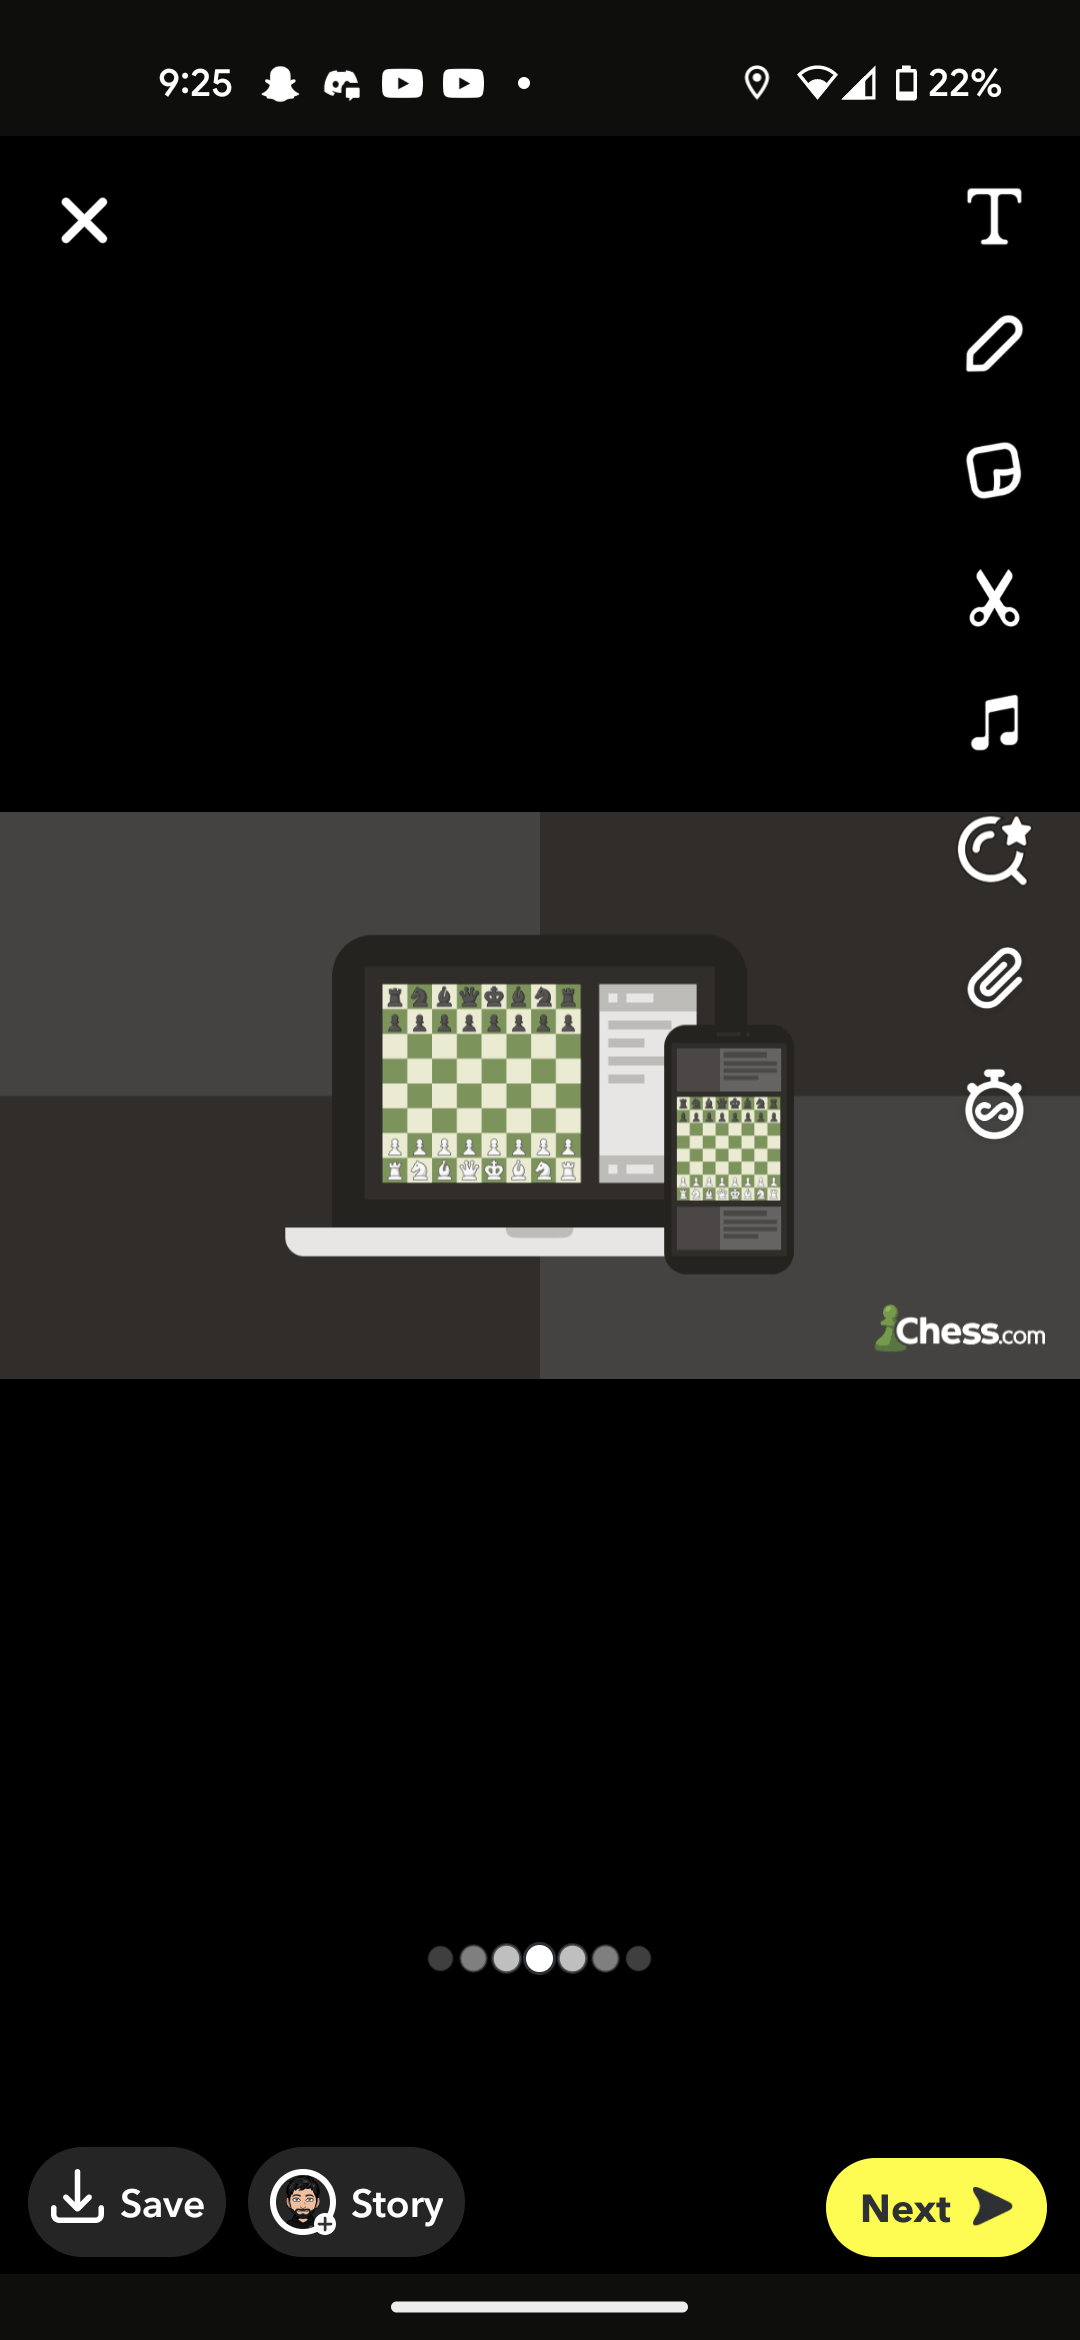 app not sharing to Snapchat correctly - Chess Forums